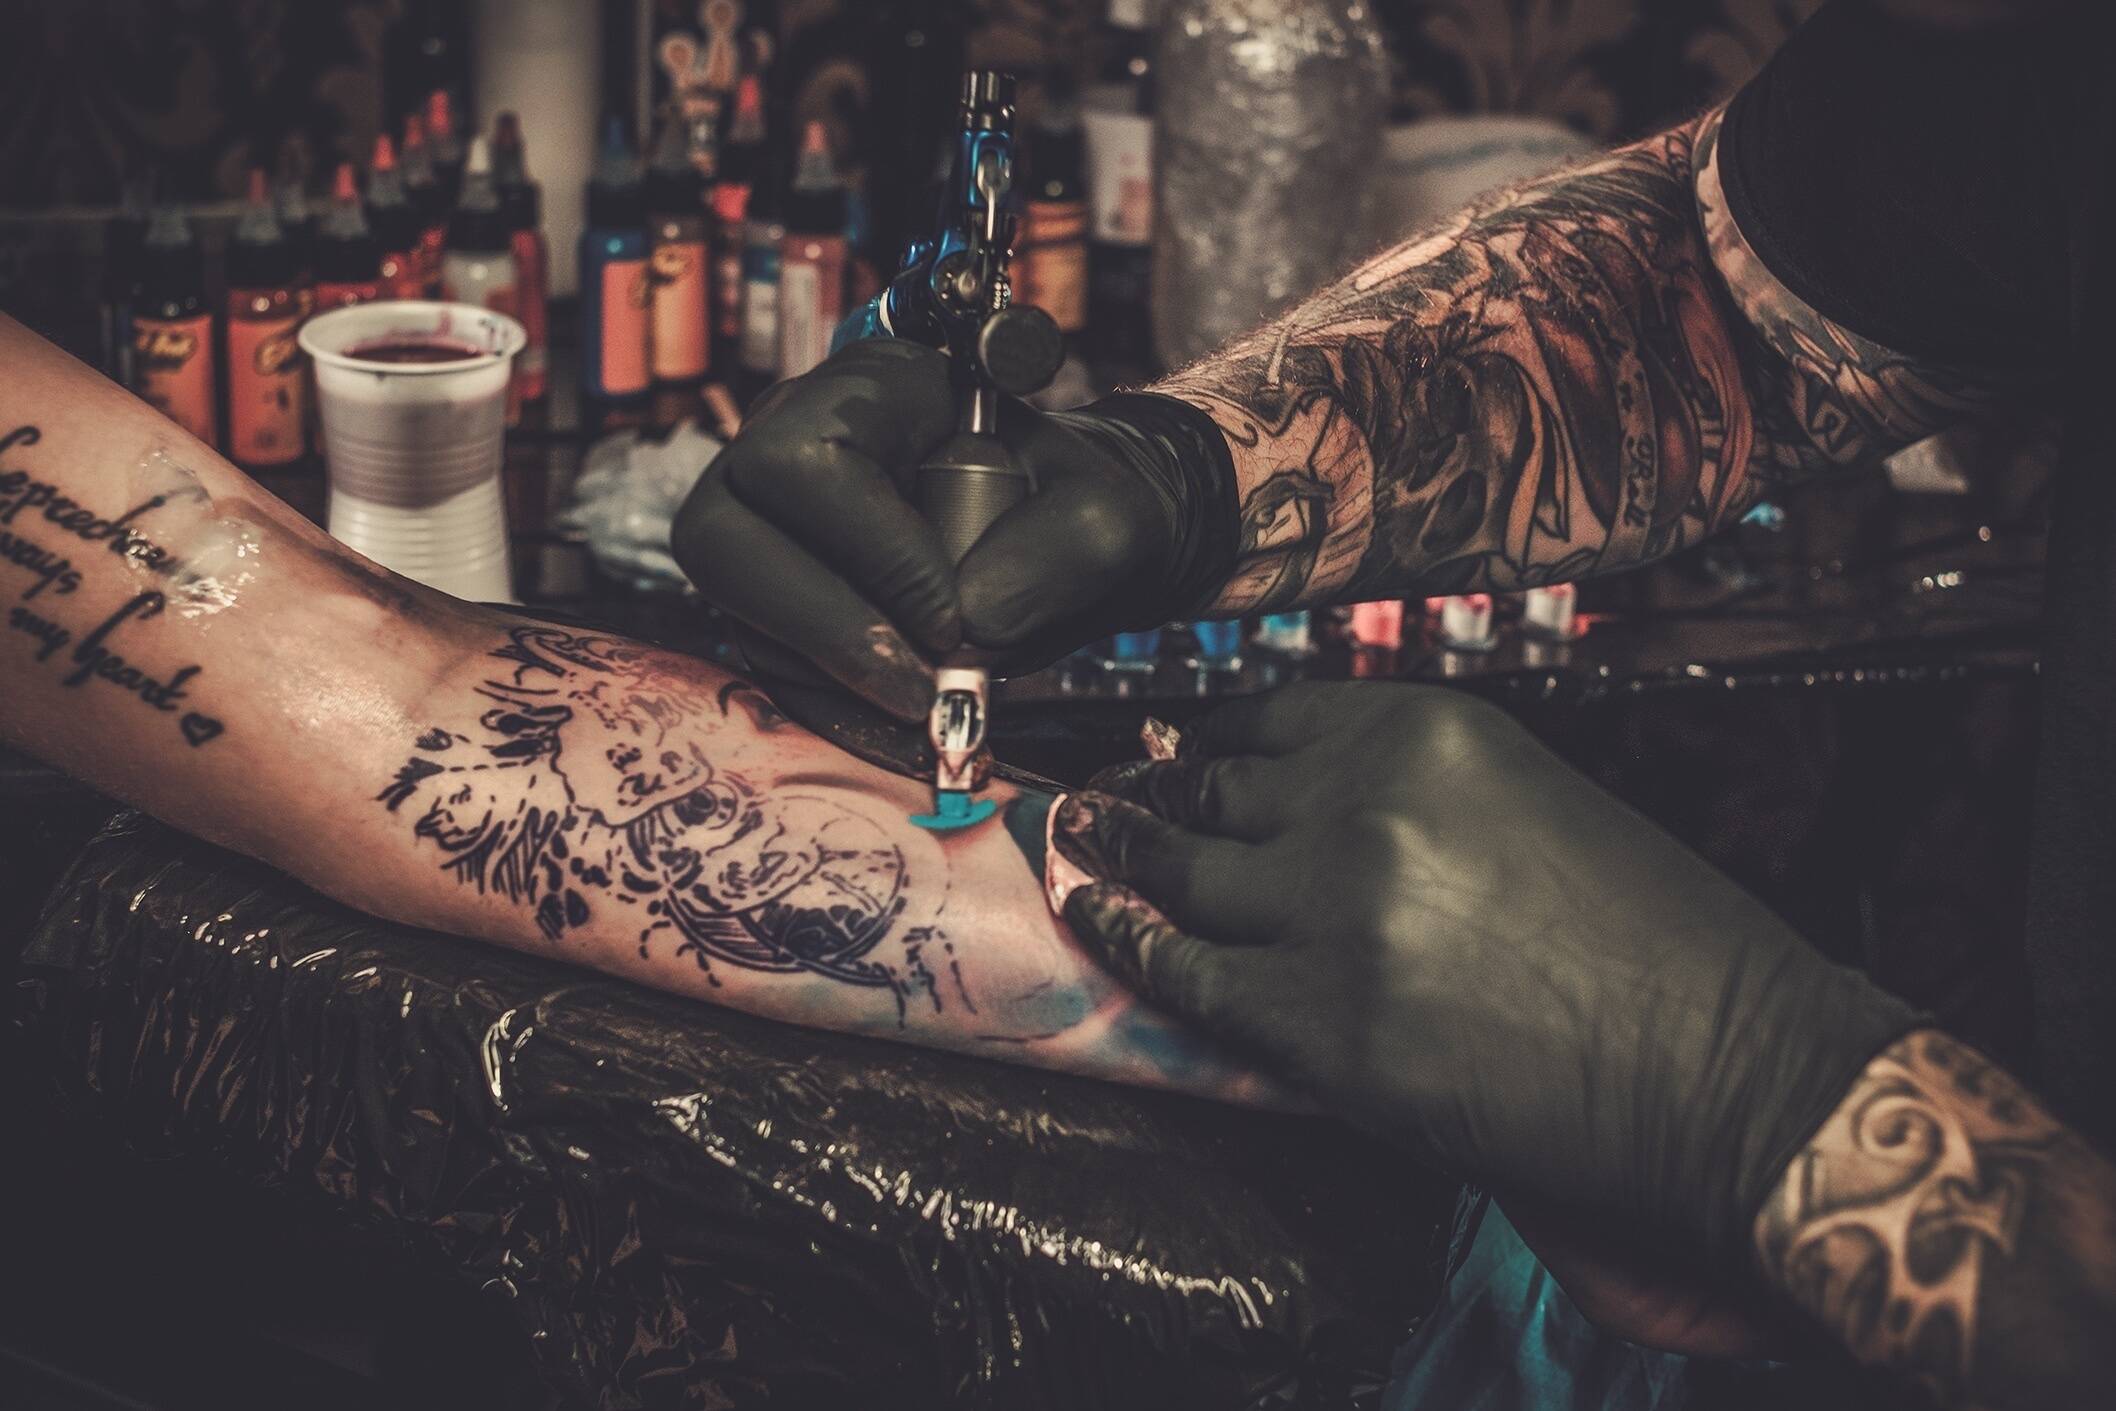 From cultural to criminal — the complex world of tattoos in Asian families  - ABC News